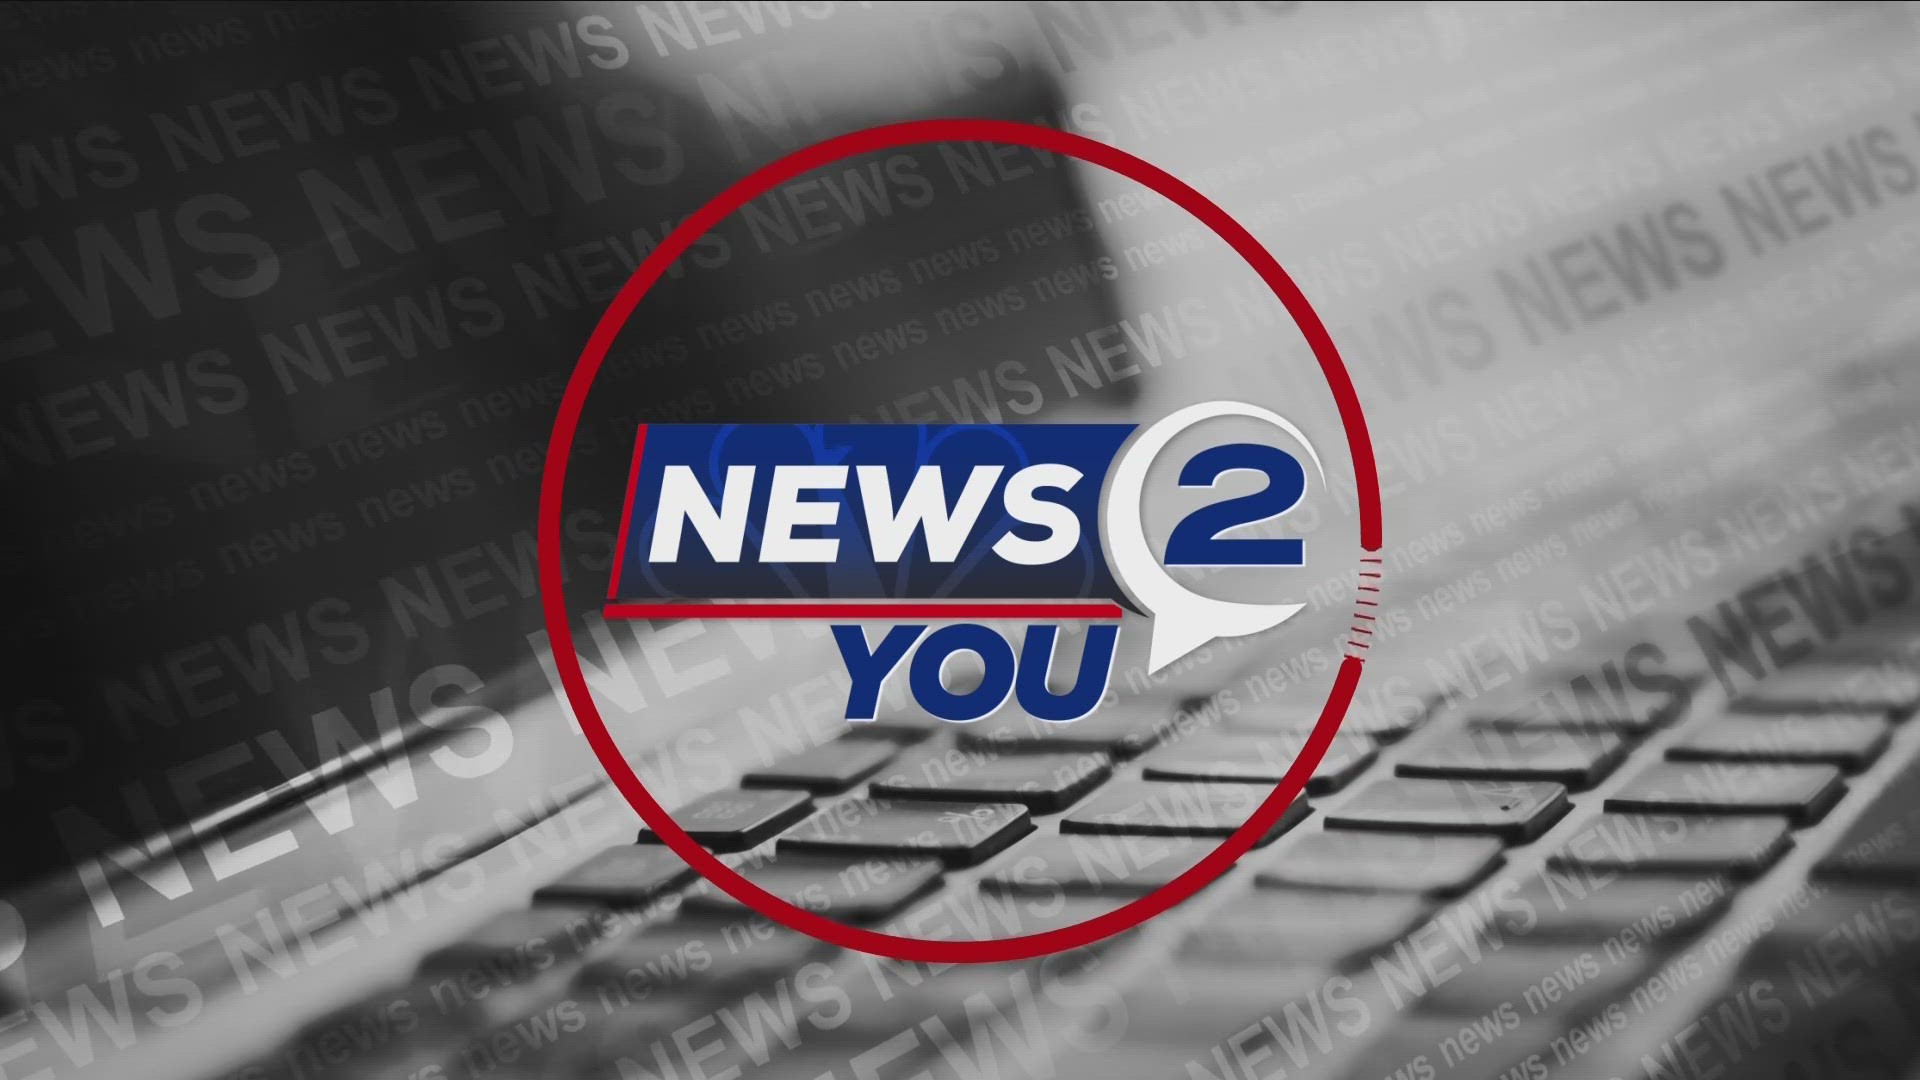 News 2 You 'election week special'